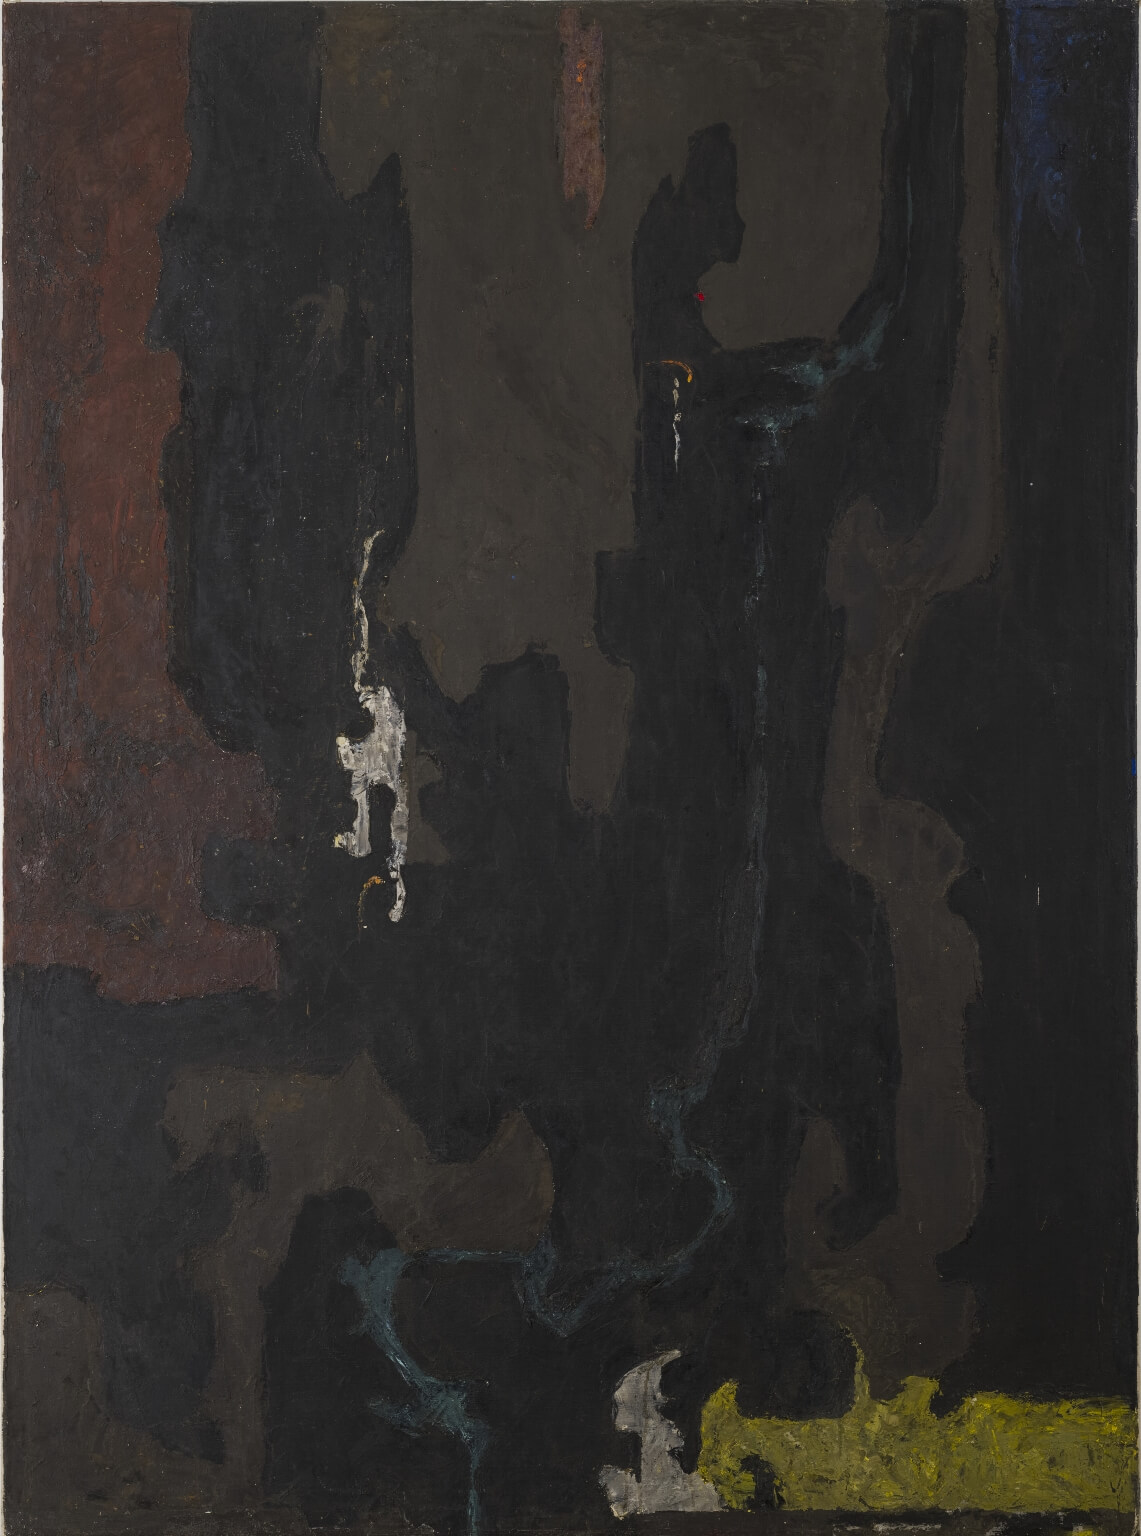 Vertical abstract painting with black background and long thin figures in a lighter black or brown moving up, with small splotches of yellow and white